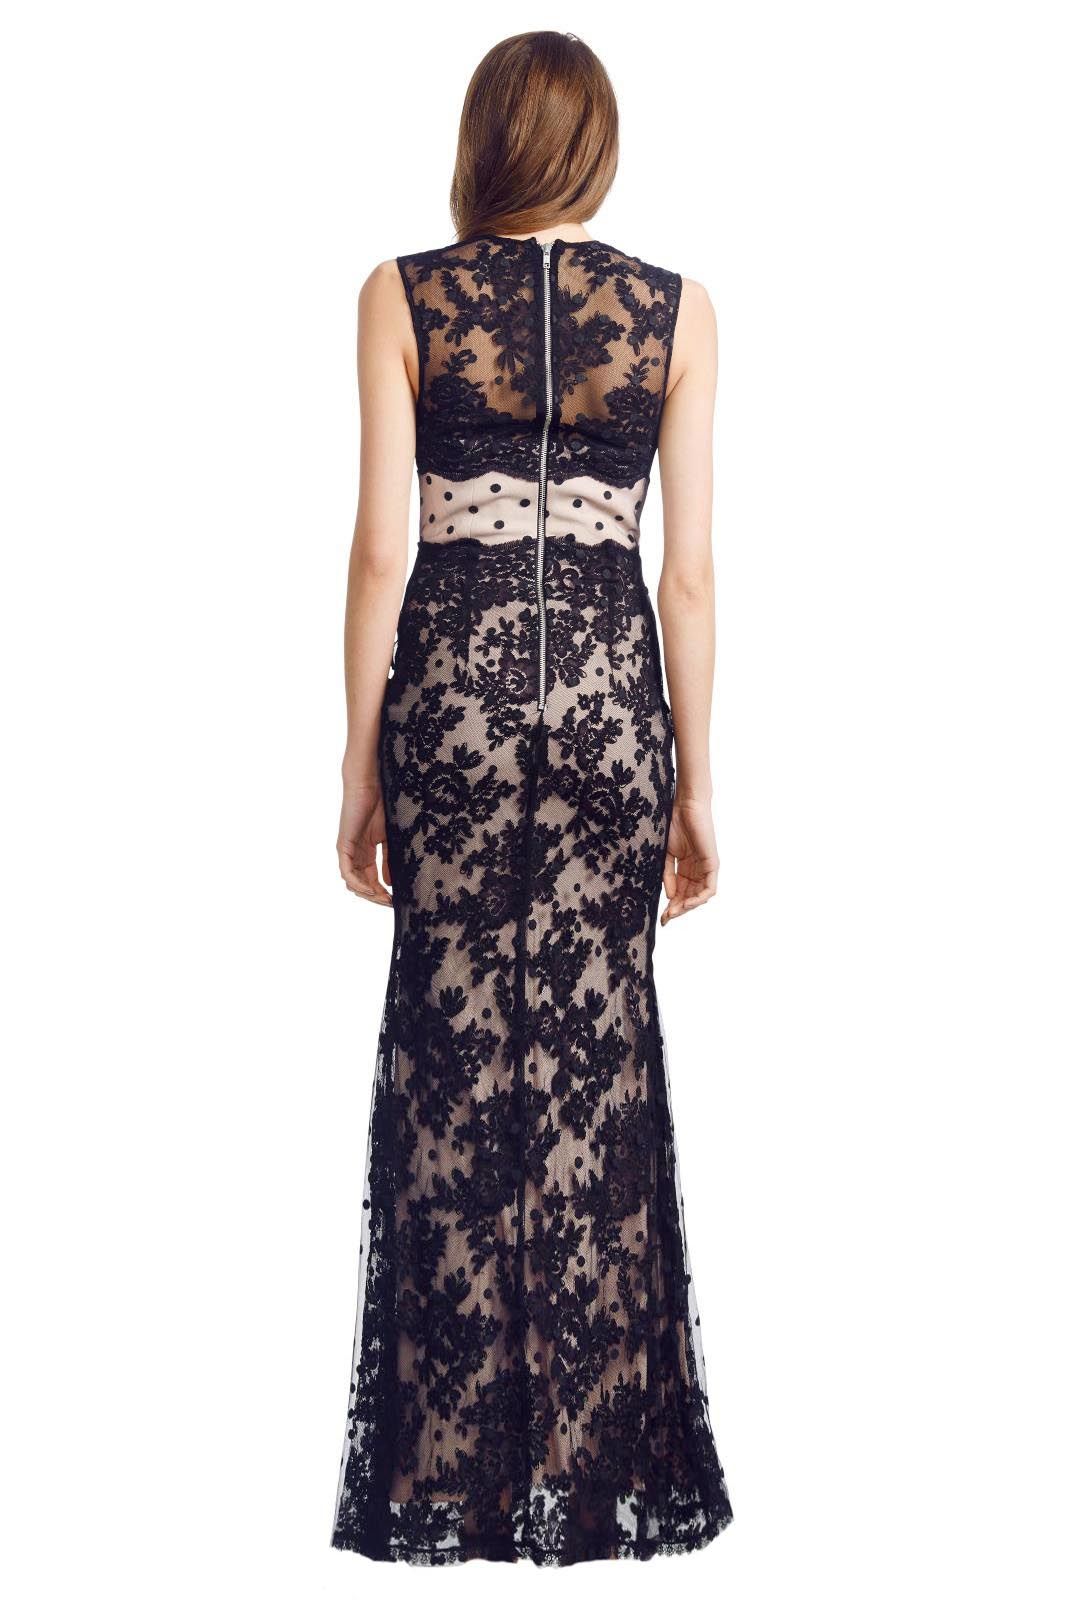 Alex Perry - Ancelina Gown - Black - Back